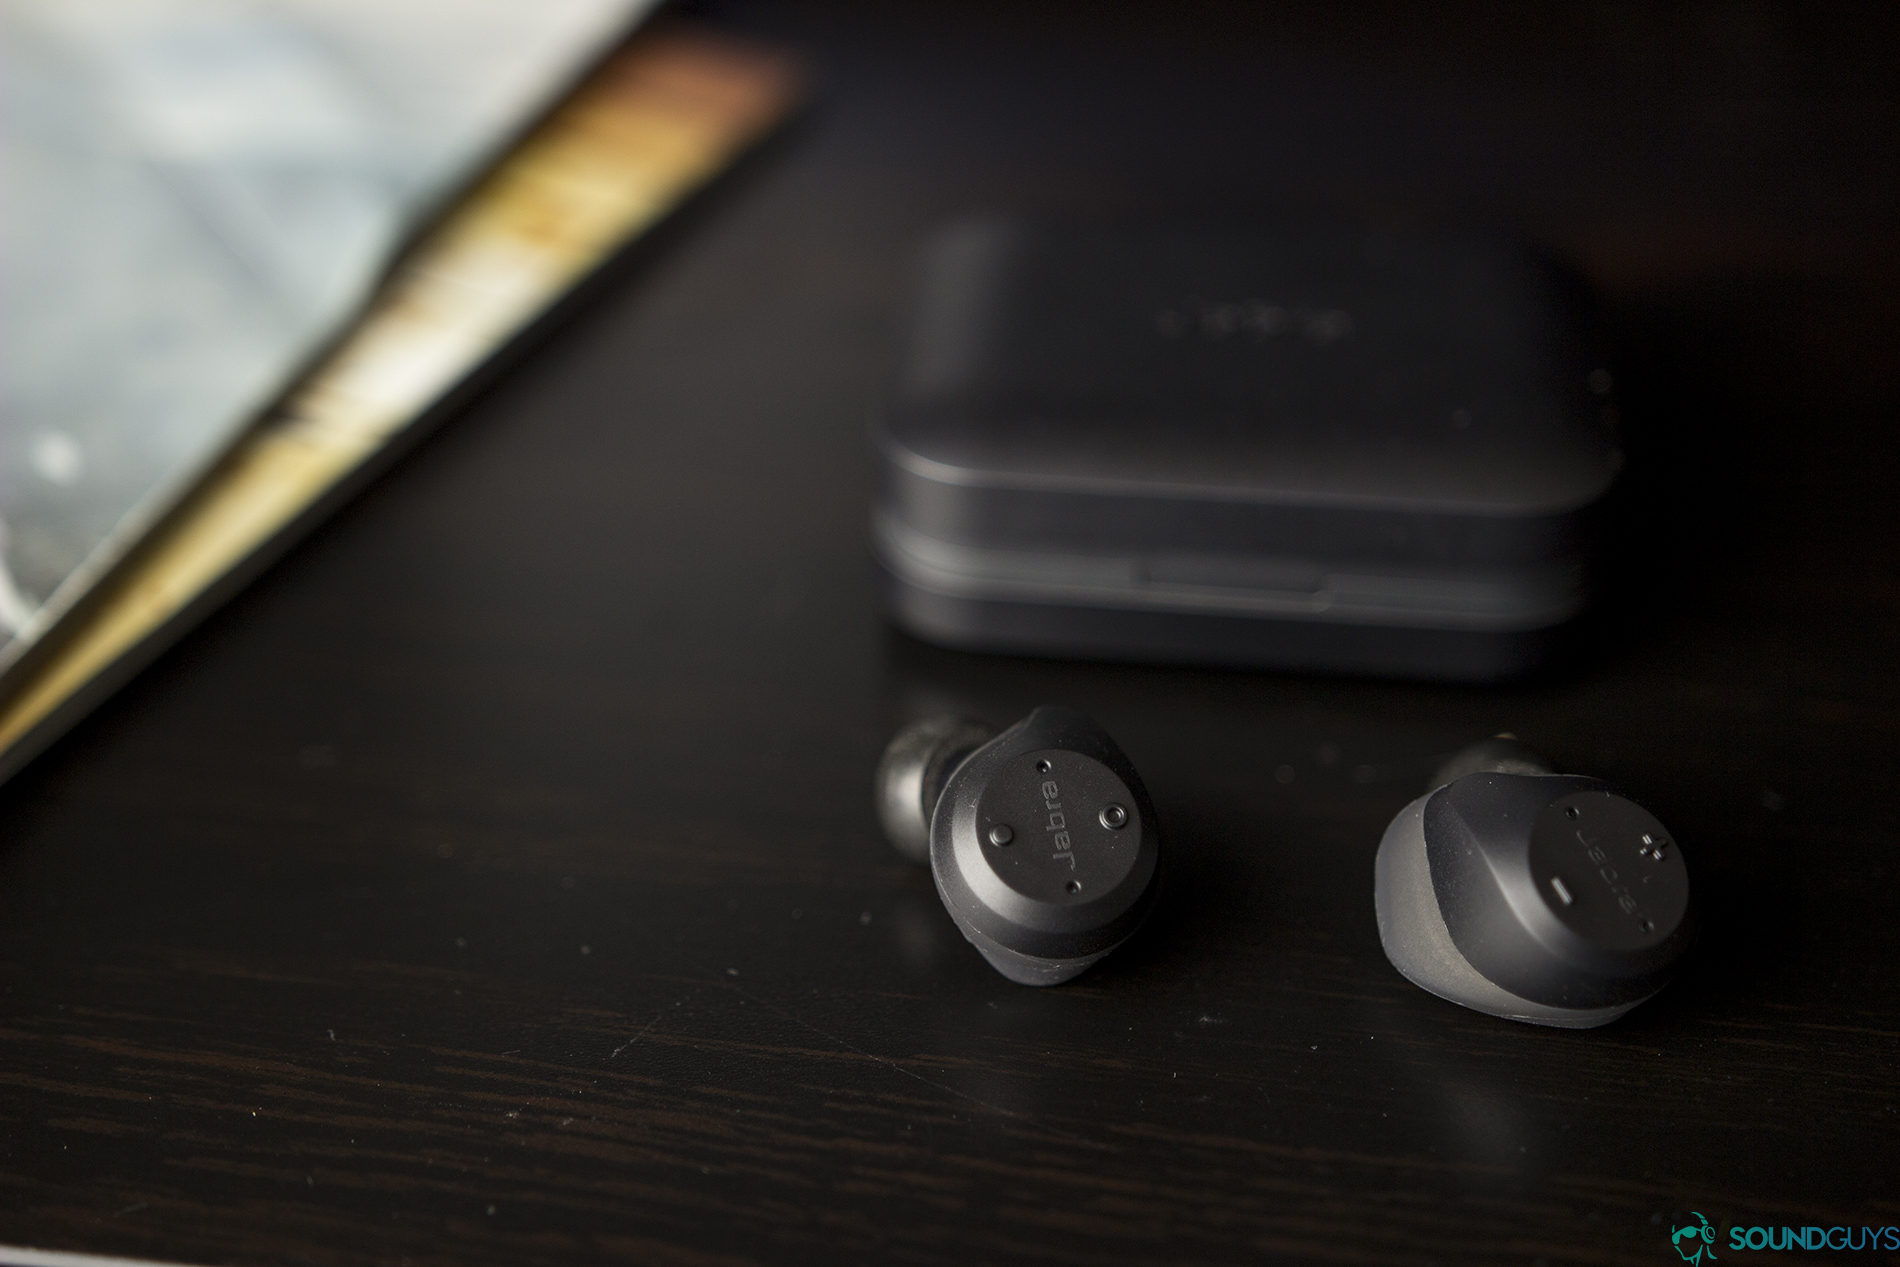 A photo of the Jabra Elite Sport true wireless earbuds on a wooden surface with the charging case in the background.